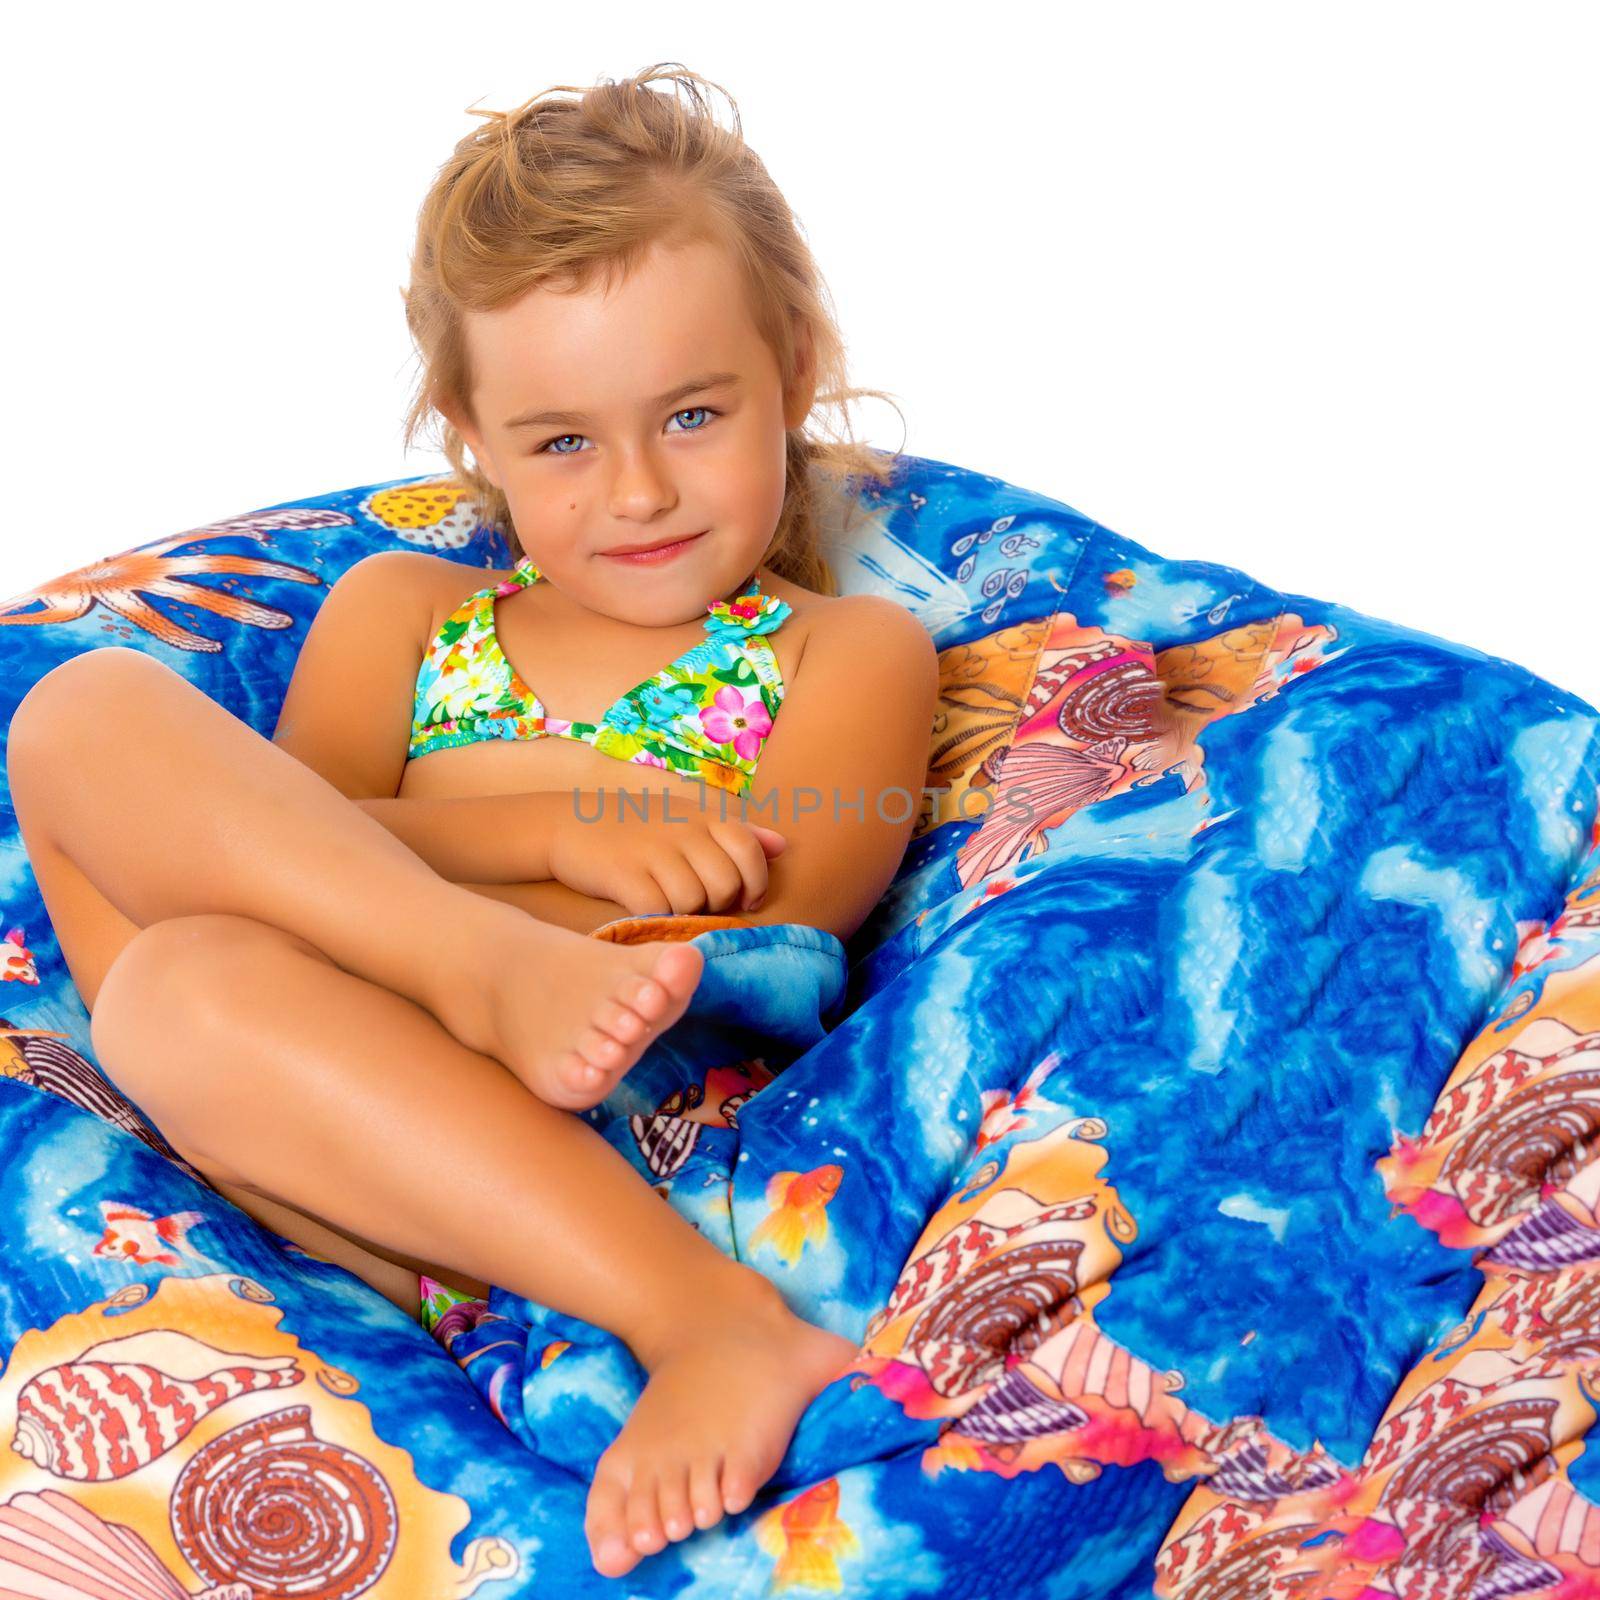 A nice little, tanned girl in a swimsuit resting on a soft pillow. The concept of summer family vacation at sea, happy childhood. Isolated on white background.